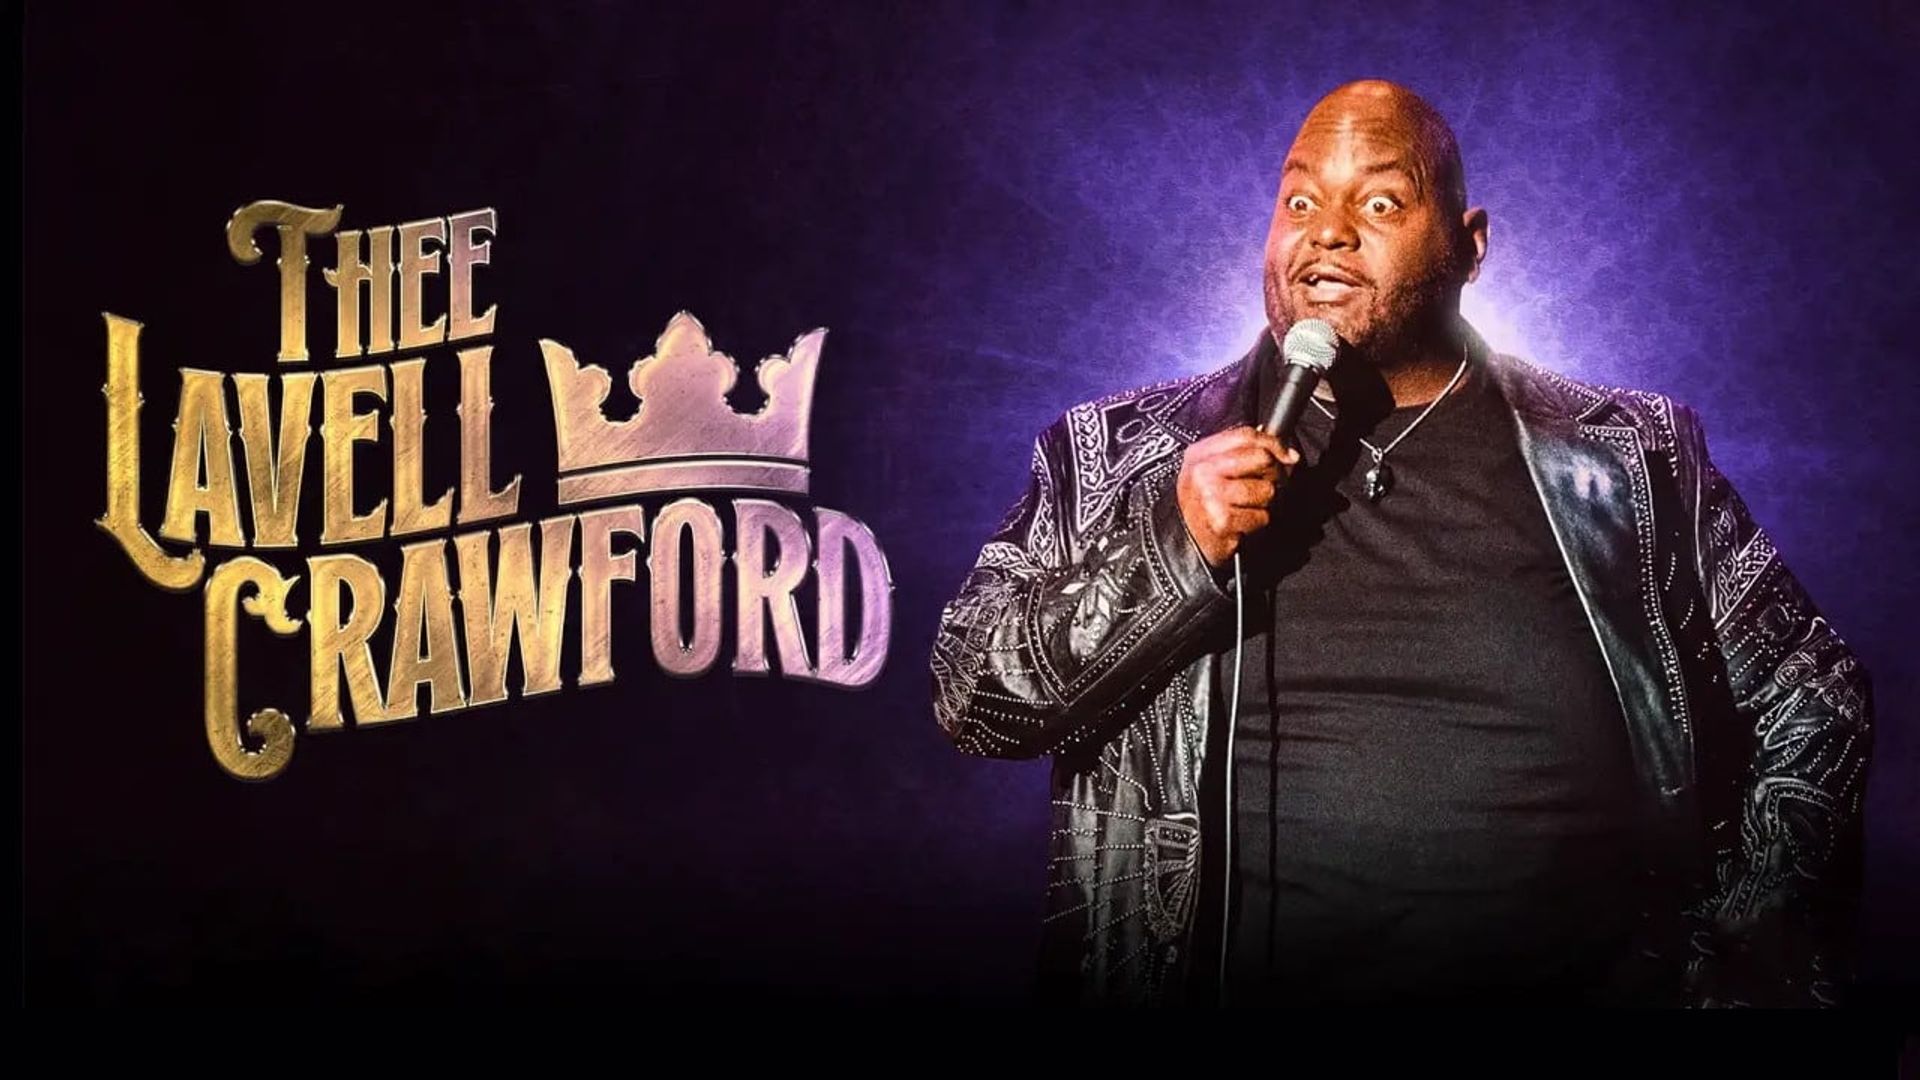 Lavell Crawford: THEE Lavell Crawford background